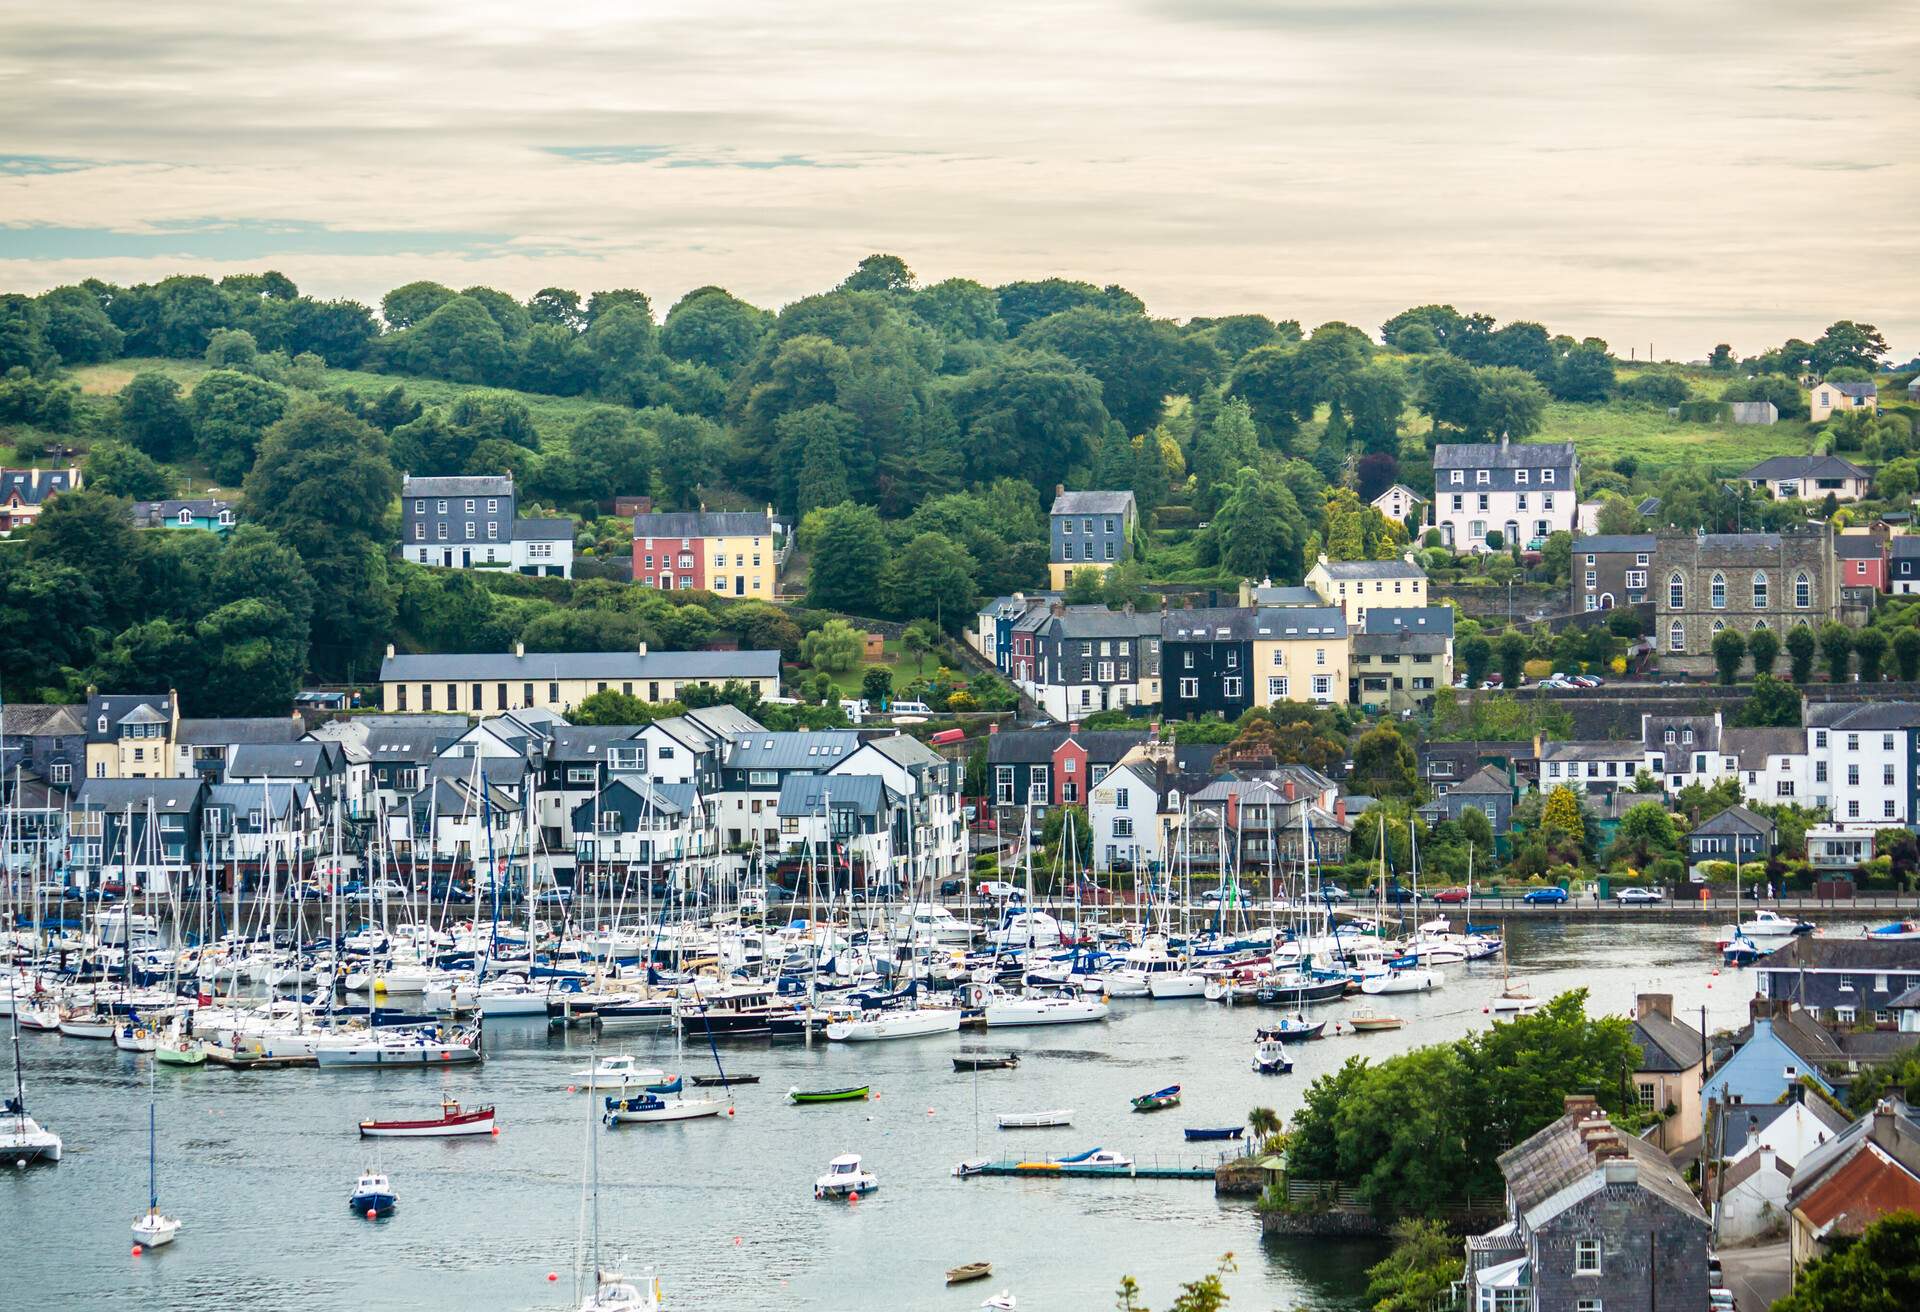 View of the Kinsale Harbour during sunset, County Cork, Ireland.